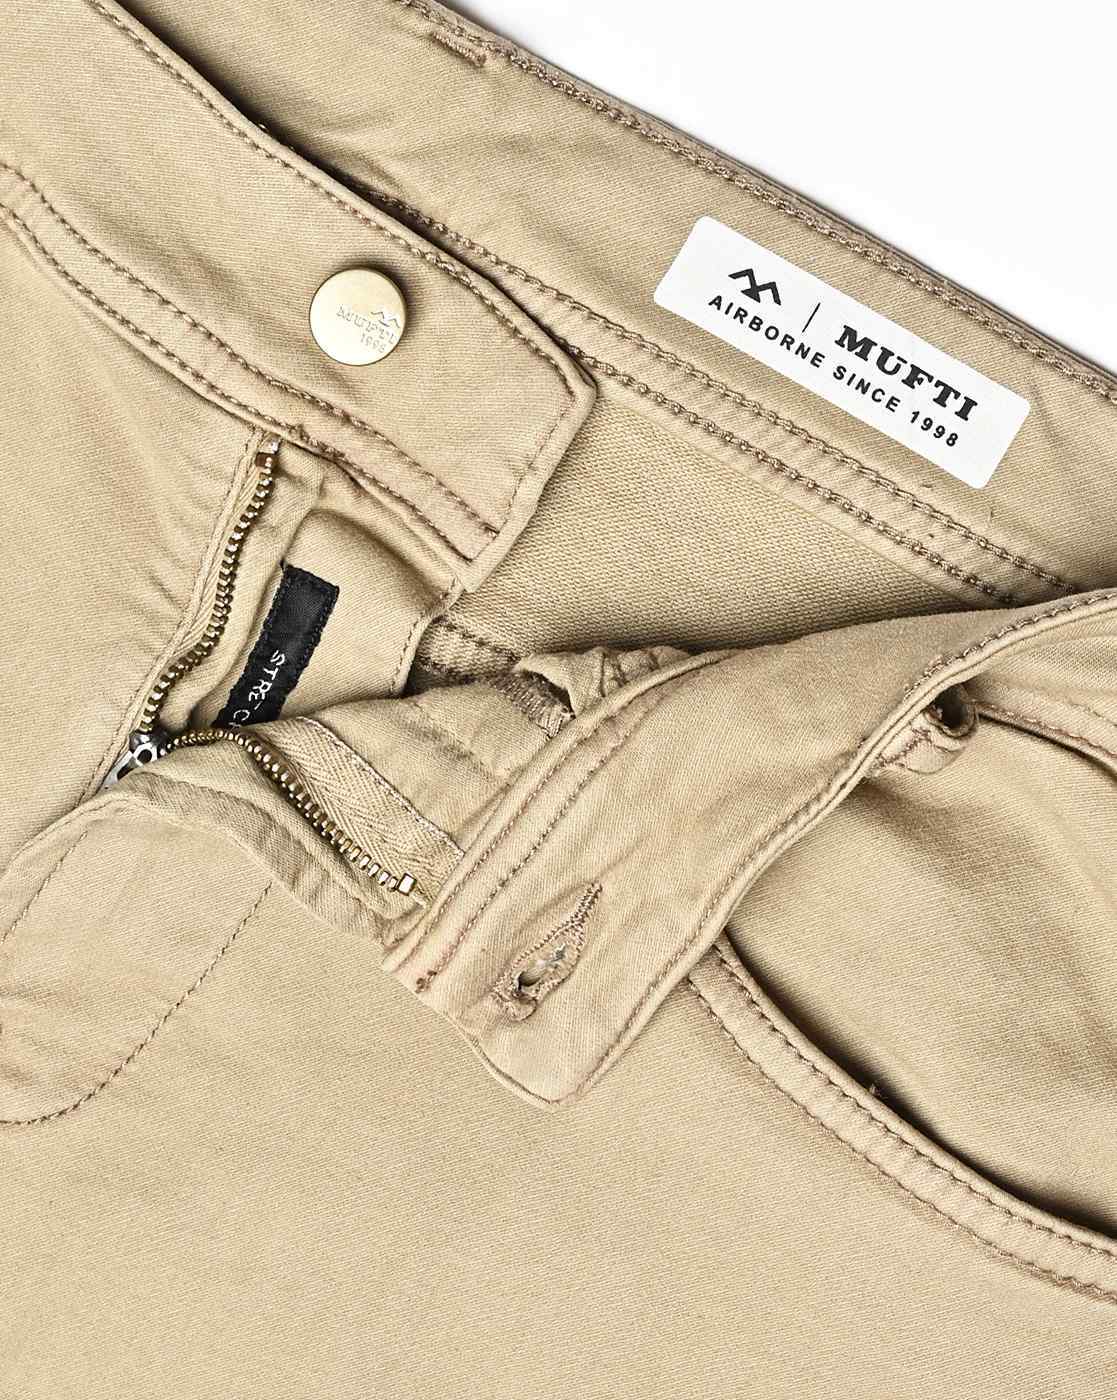 Buy Mufti Khaki Slim Fit Casual Trousers - Trousers for Men 1168466 | Myntra